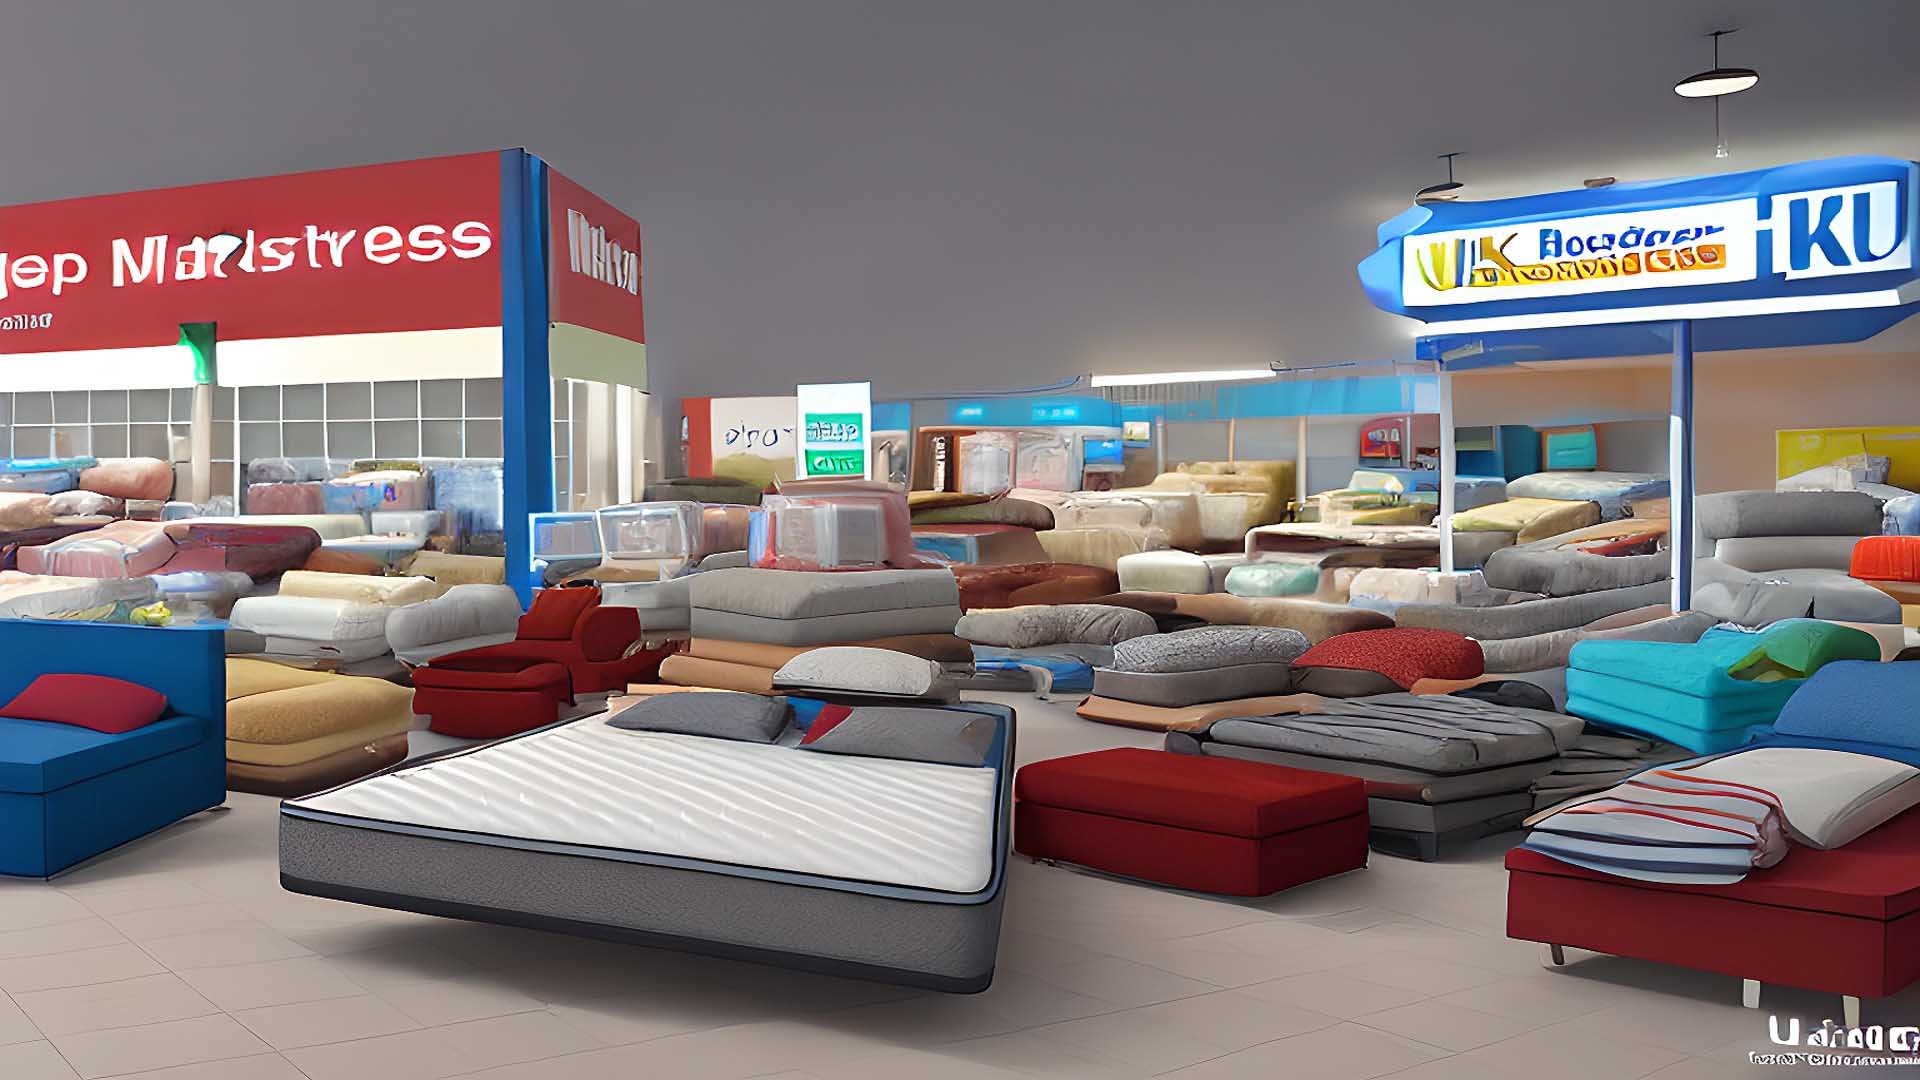 Mattress Firm Near Me in Levittown, New York, NY